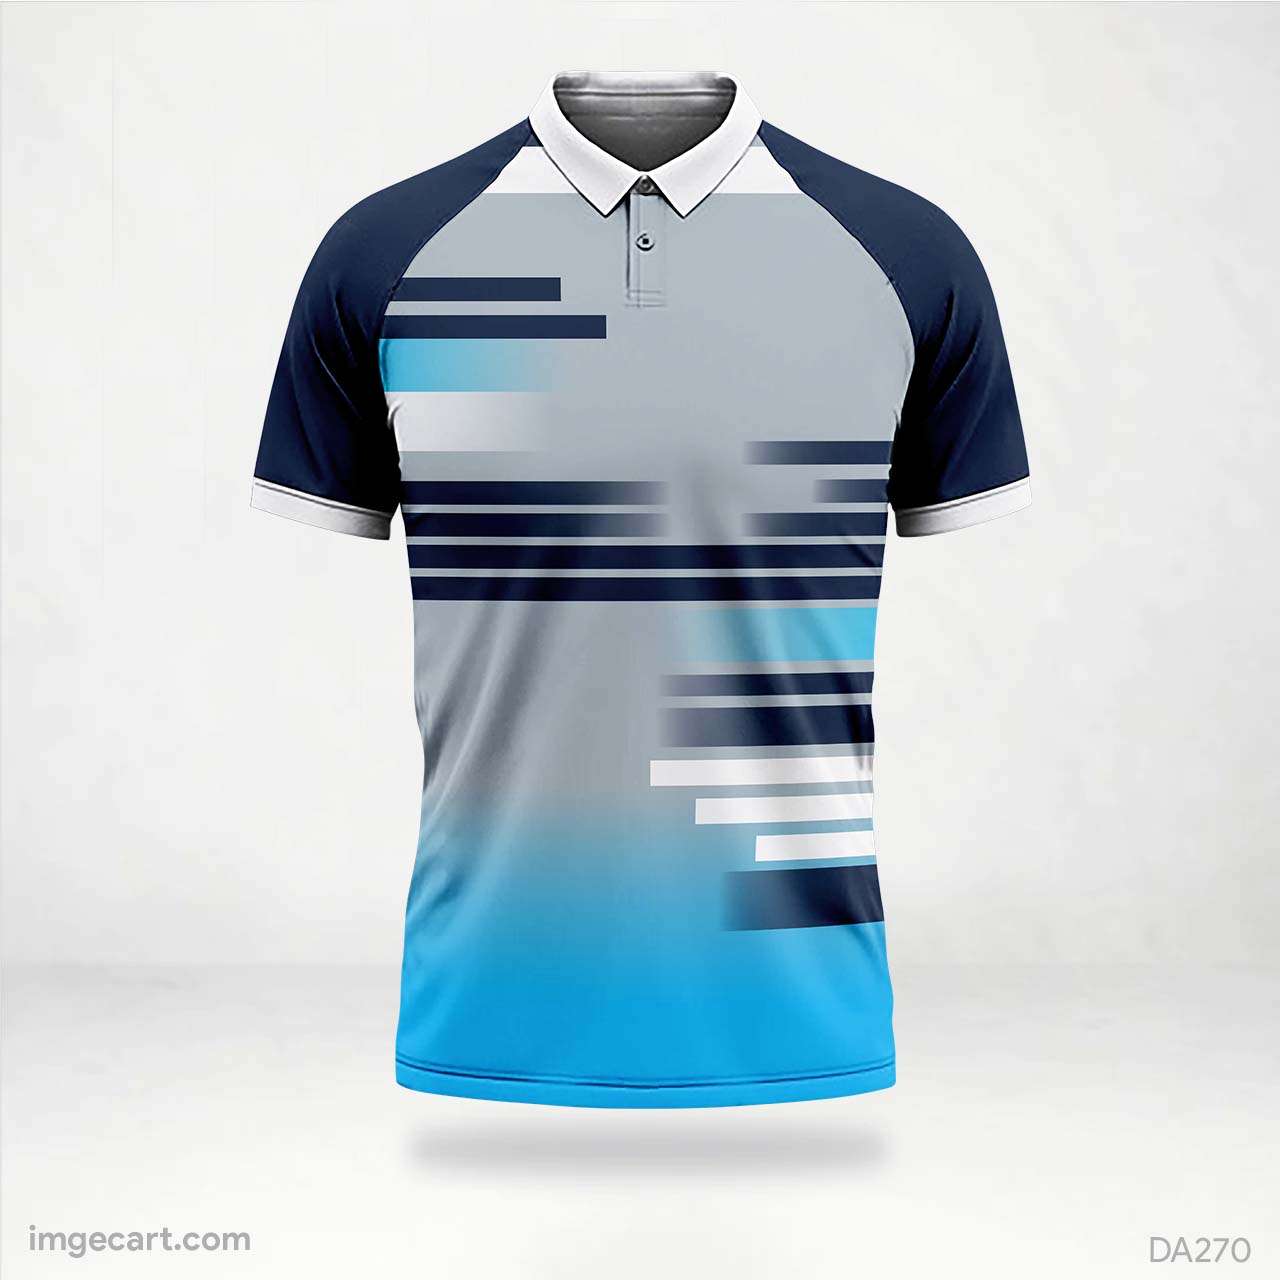 E-sports Jersey Design Blue with Grey and Black pattern - imgecart